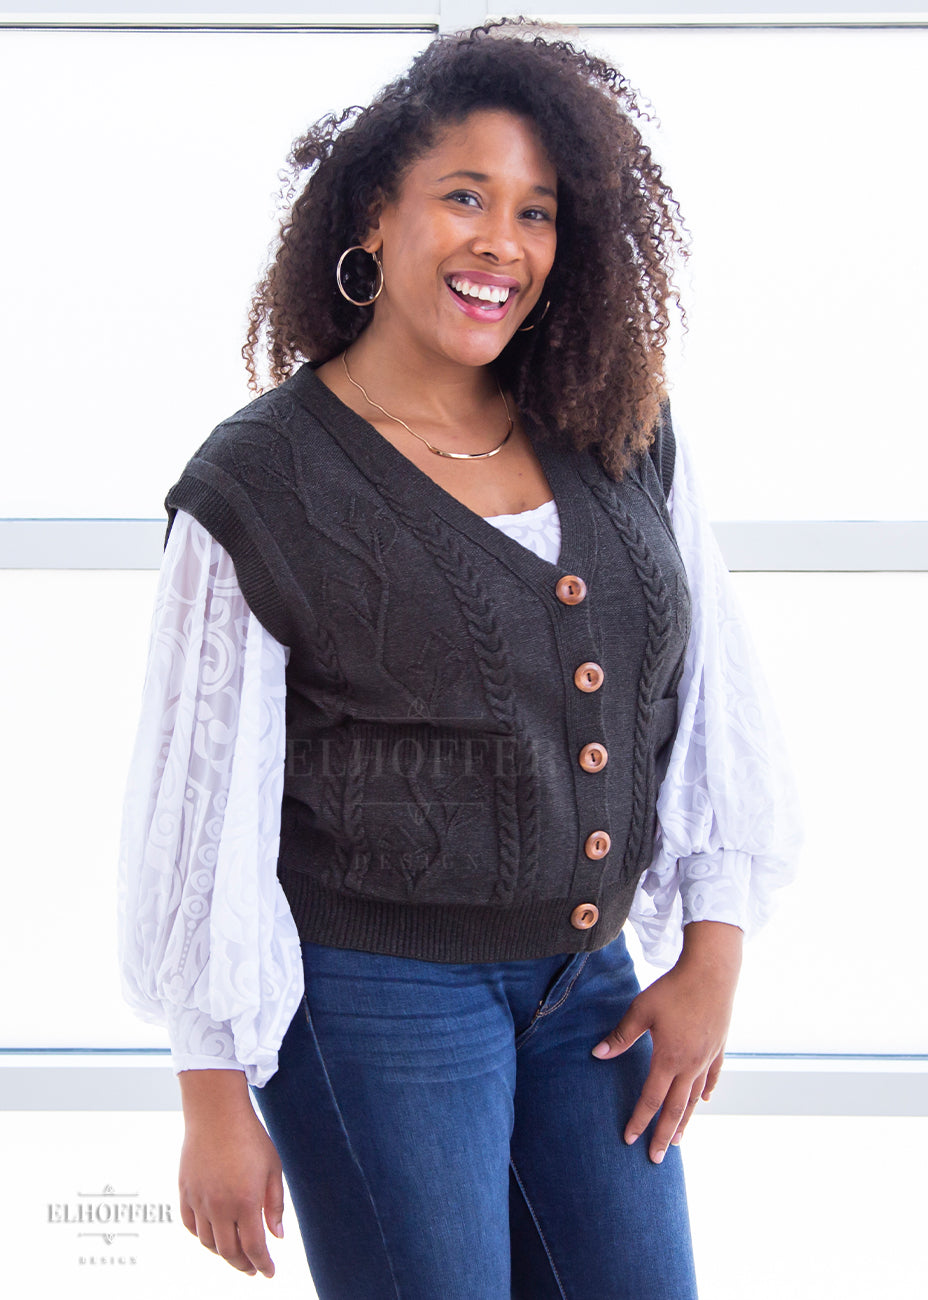 Francesca, a light brown skinned L model with long dark brown tight curly hair, is smiling while wearing the M (L-2XL) sample of a dark grey button up knit vest with a leafy vine and cable knit pattern, light brown buttons, and front pockets over a white long sleeve burnout velvet top with billowing sleeves.